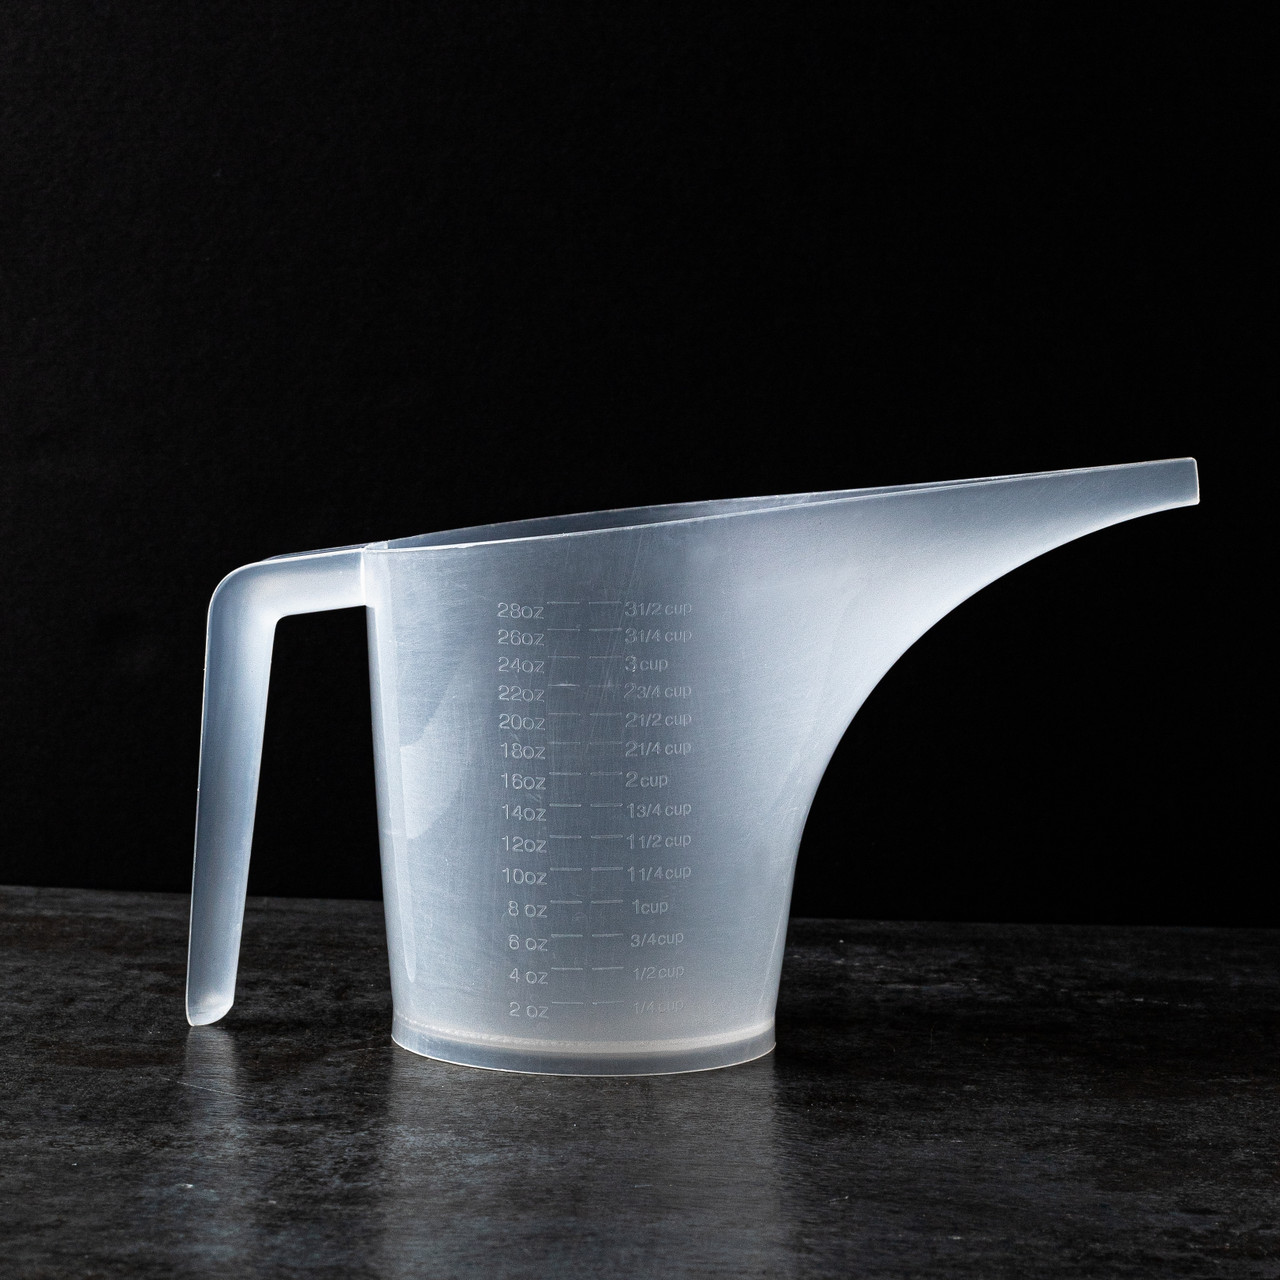 Wet Measure Spoons, Pitcher, & Funnel